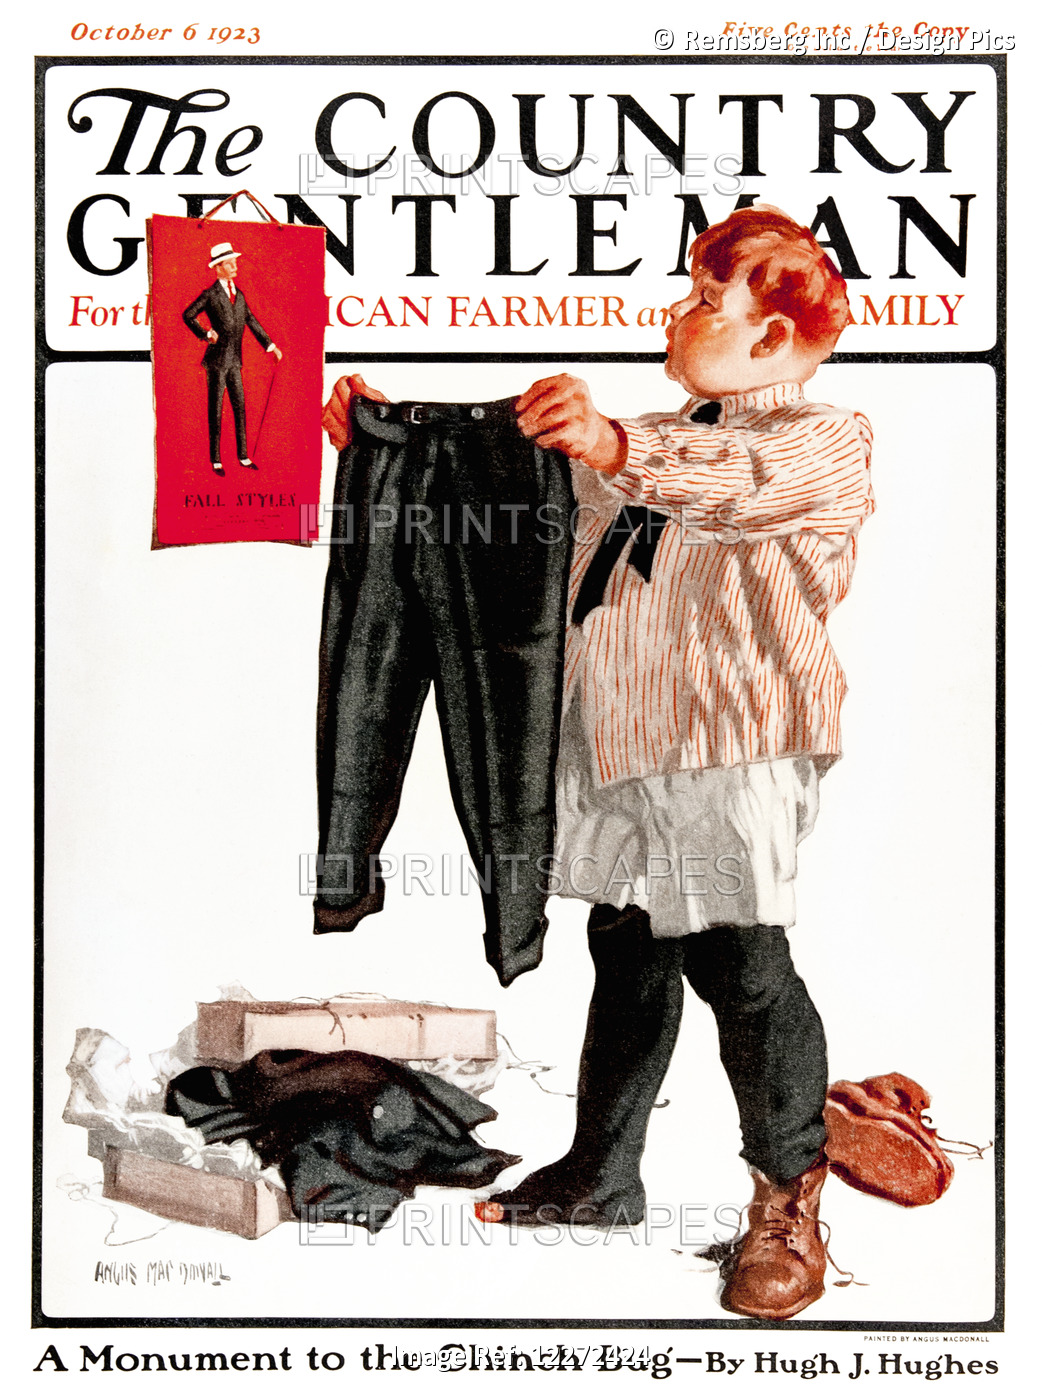 Cover Of Country Gentleman Agricultural Magazine From The Early 20th Century. .